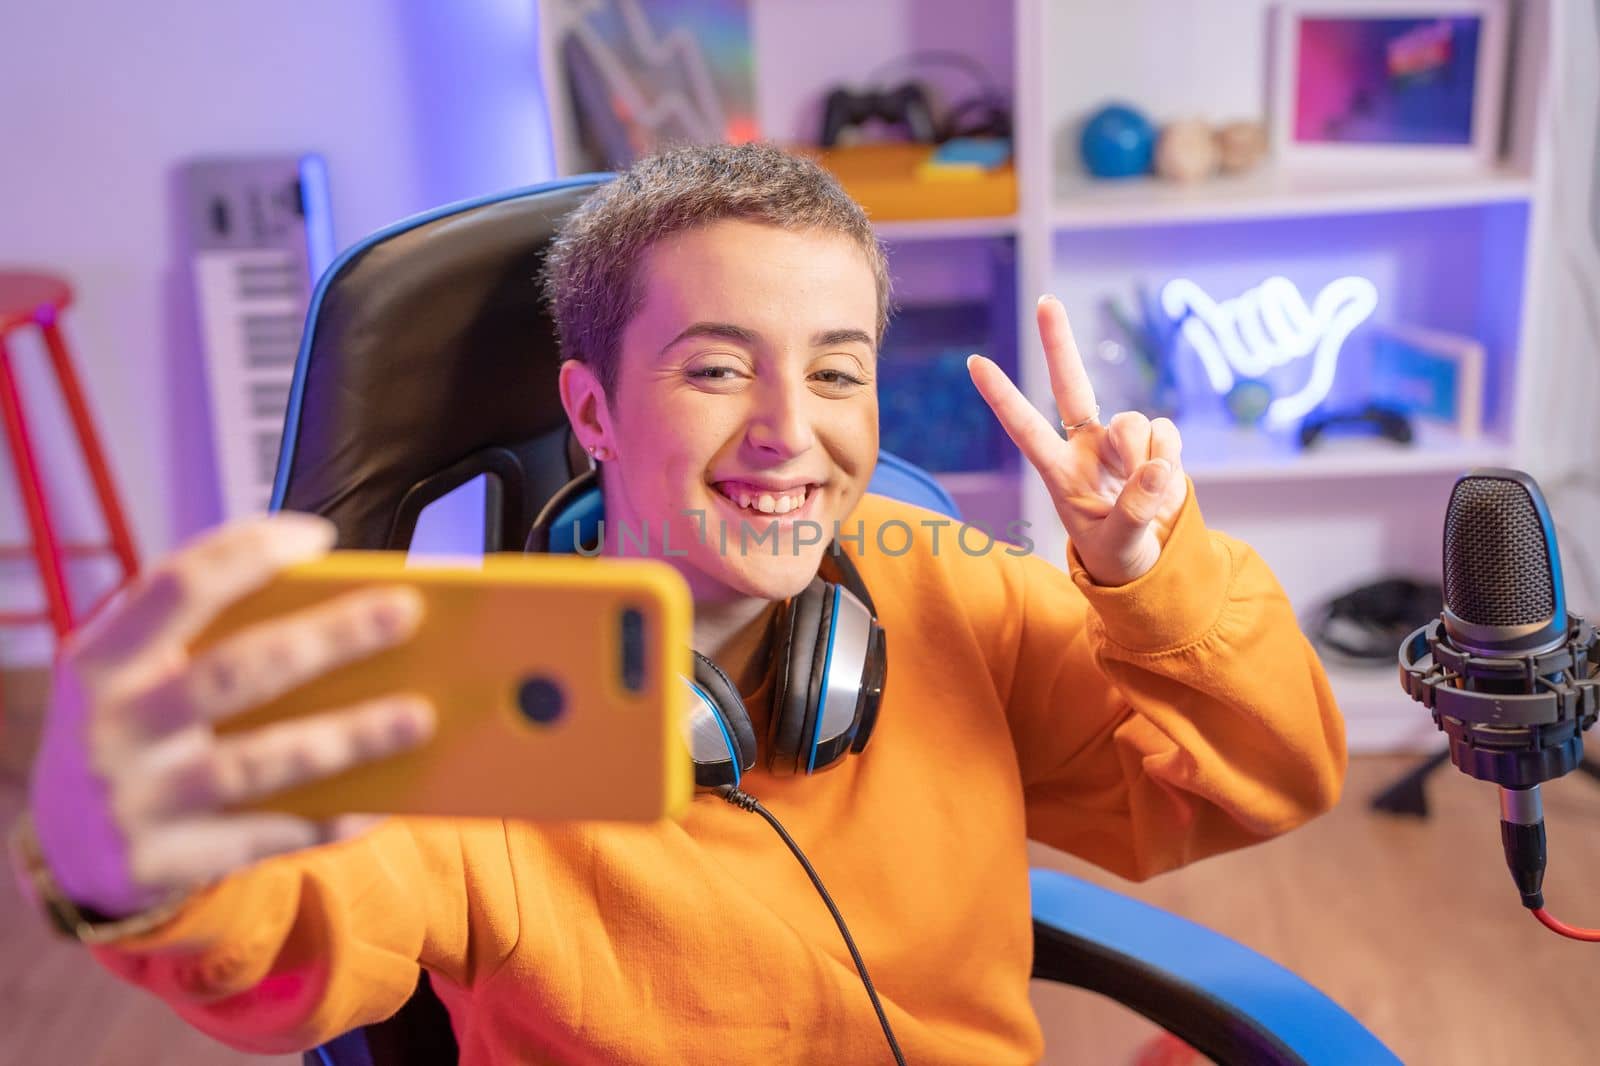 Gamer girl with short haircut taking a selfie playing online games and streaming by PaulCarr